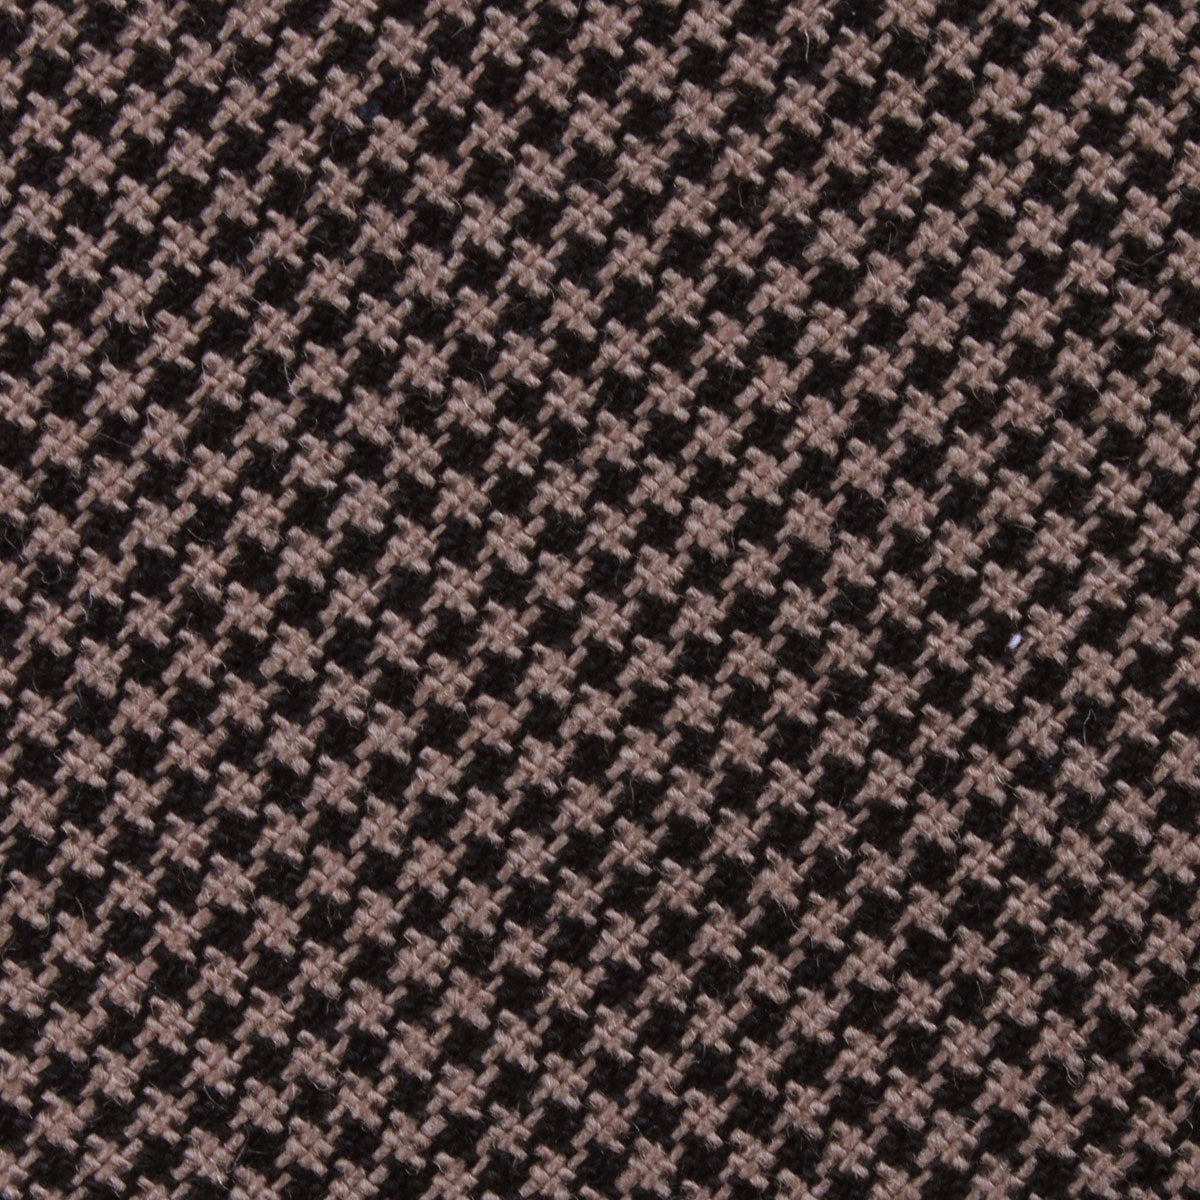 Madrid Brown Houndstooth Fabric Pocket Square